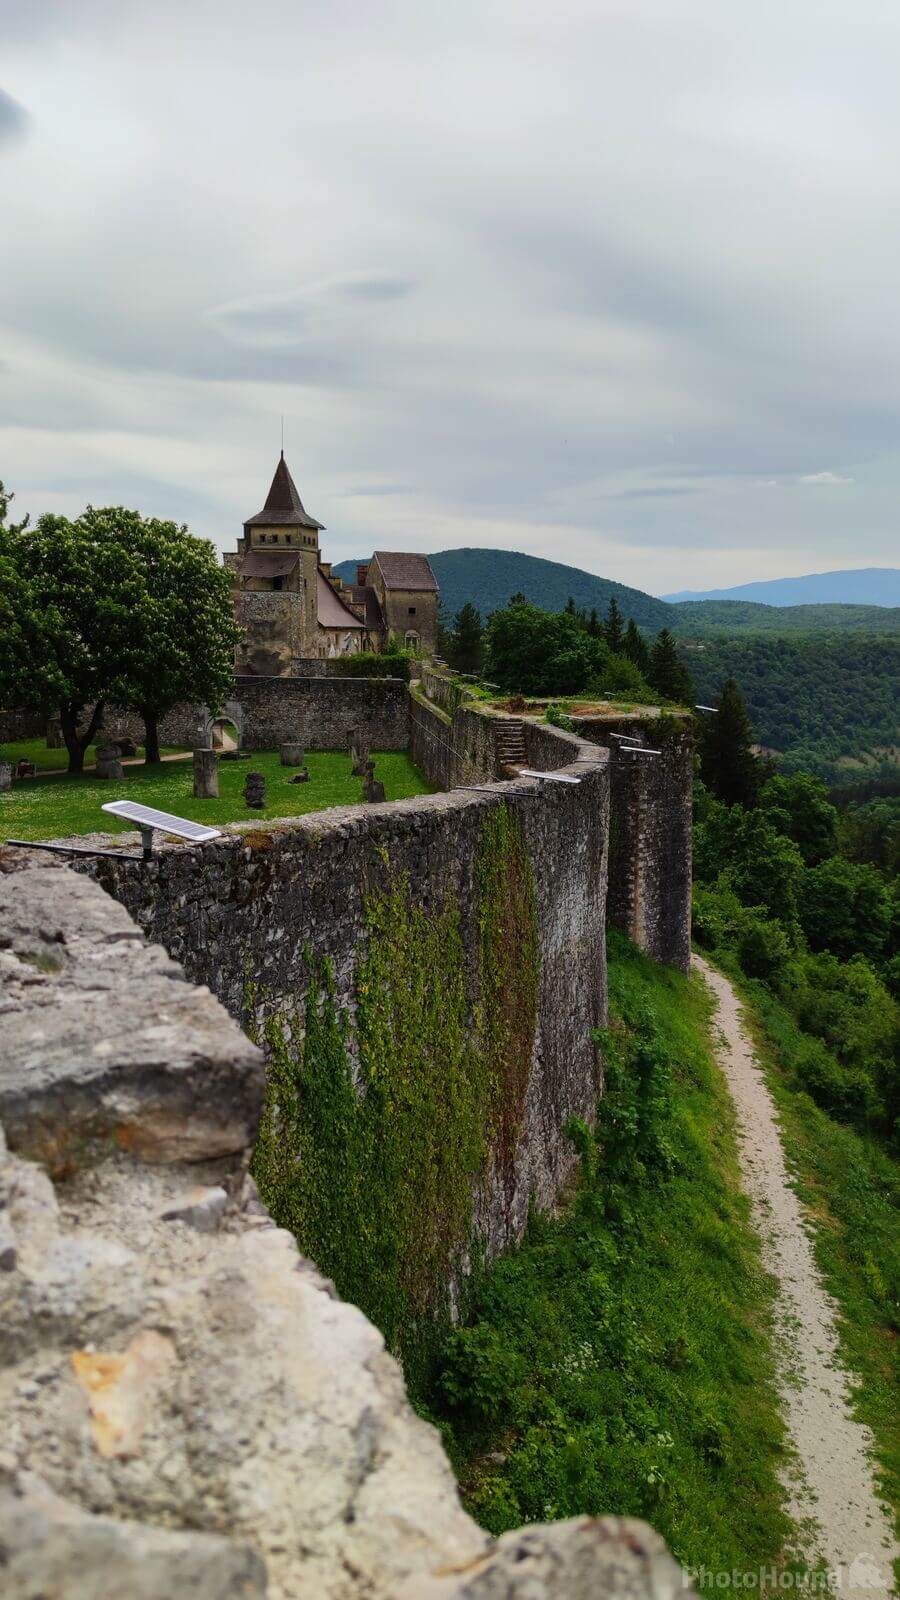 Image of Ostrožac Castle by Team PhotoHound